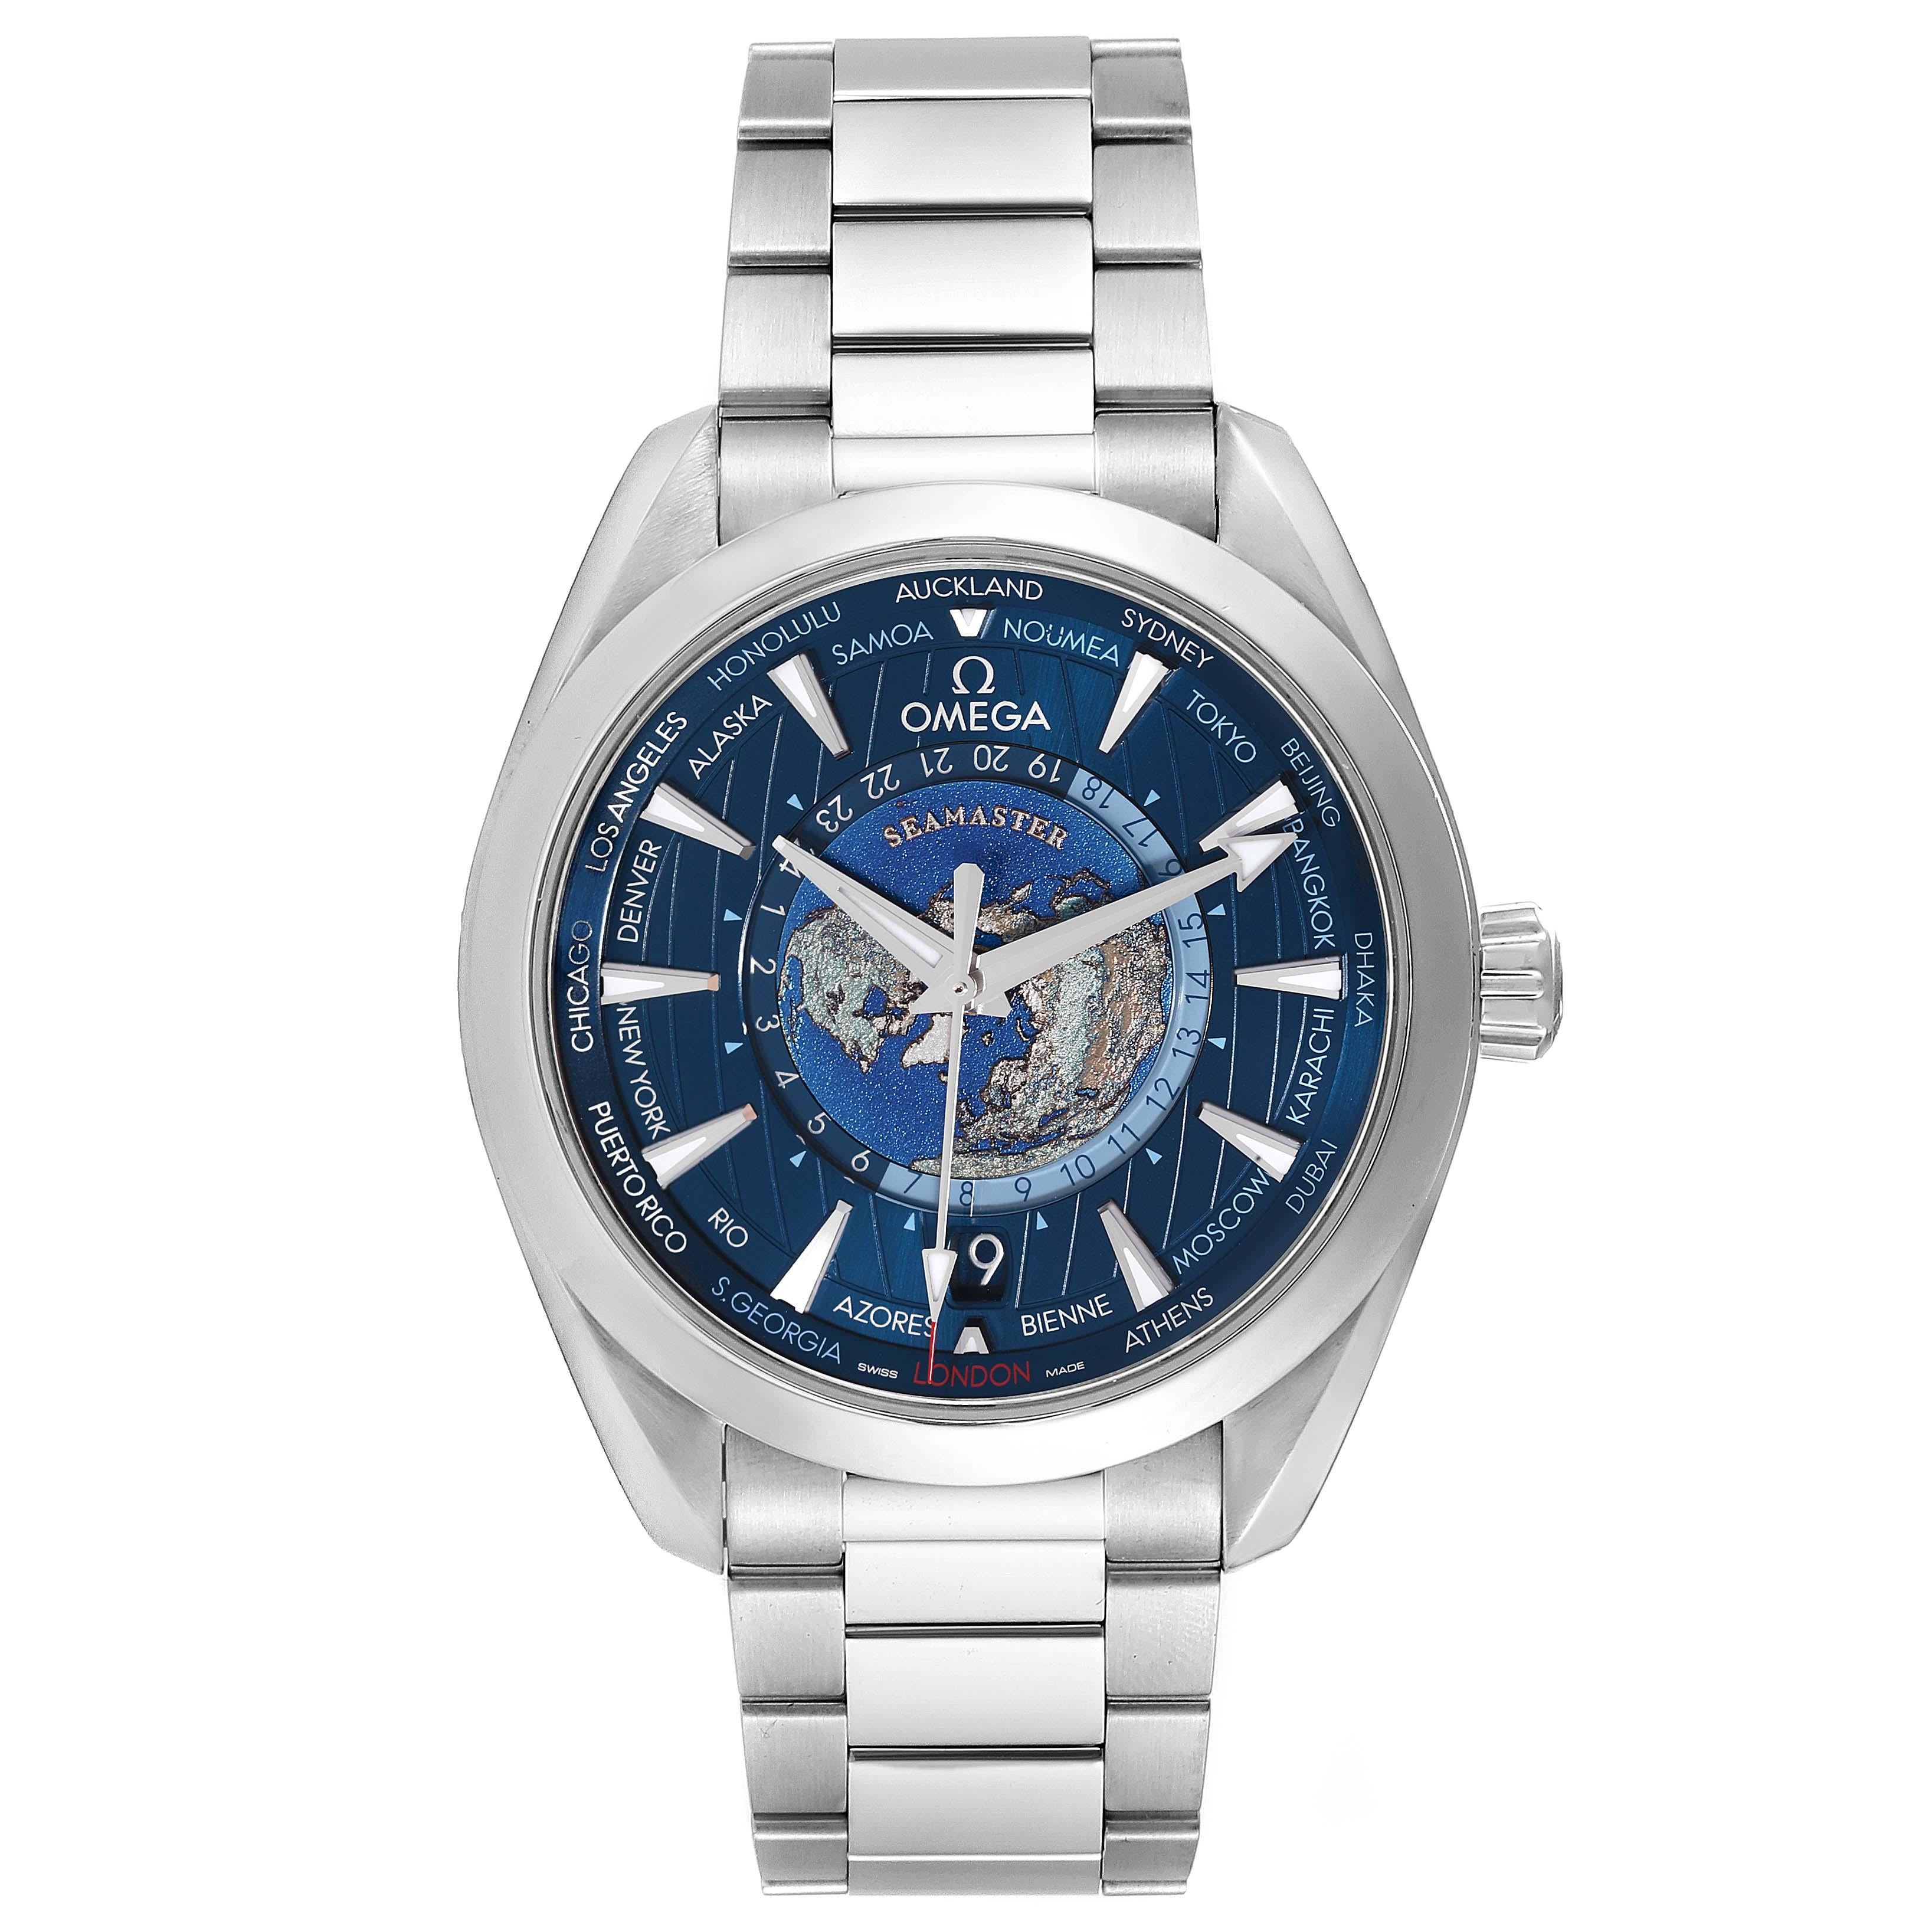 Omega Seamaster Aqua Terra Worldtimer Steel Mens Watch 220.10.43.22.03.001 Box Card. Automatic self-winding movement with Co-Axial Escapement for greater precision. GMT with time zone function. Silicon balance-spring on free sprung-balance, 2